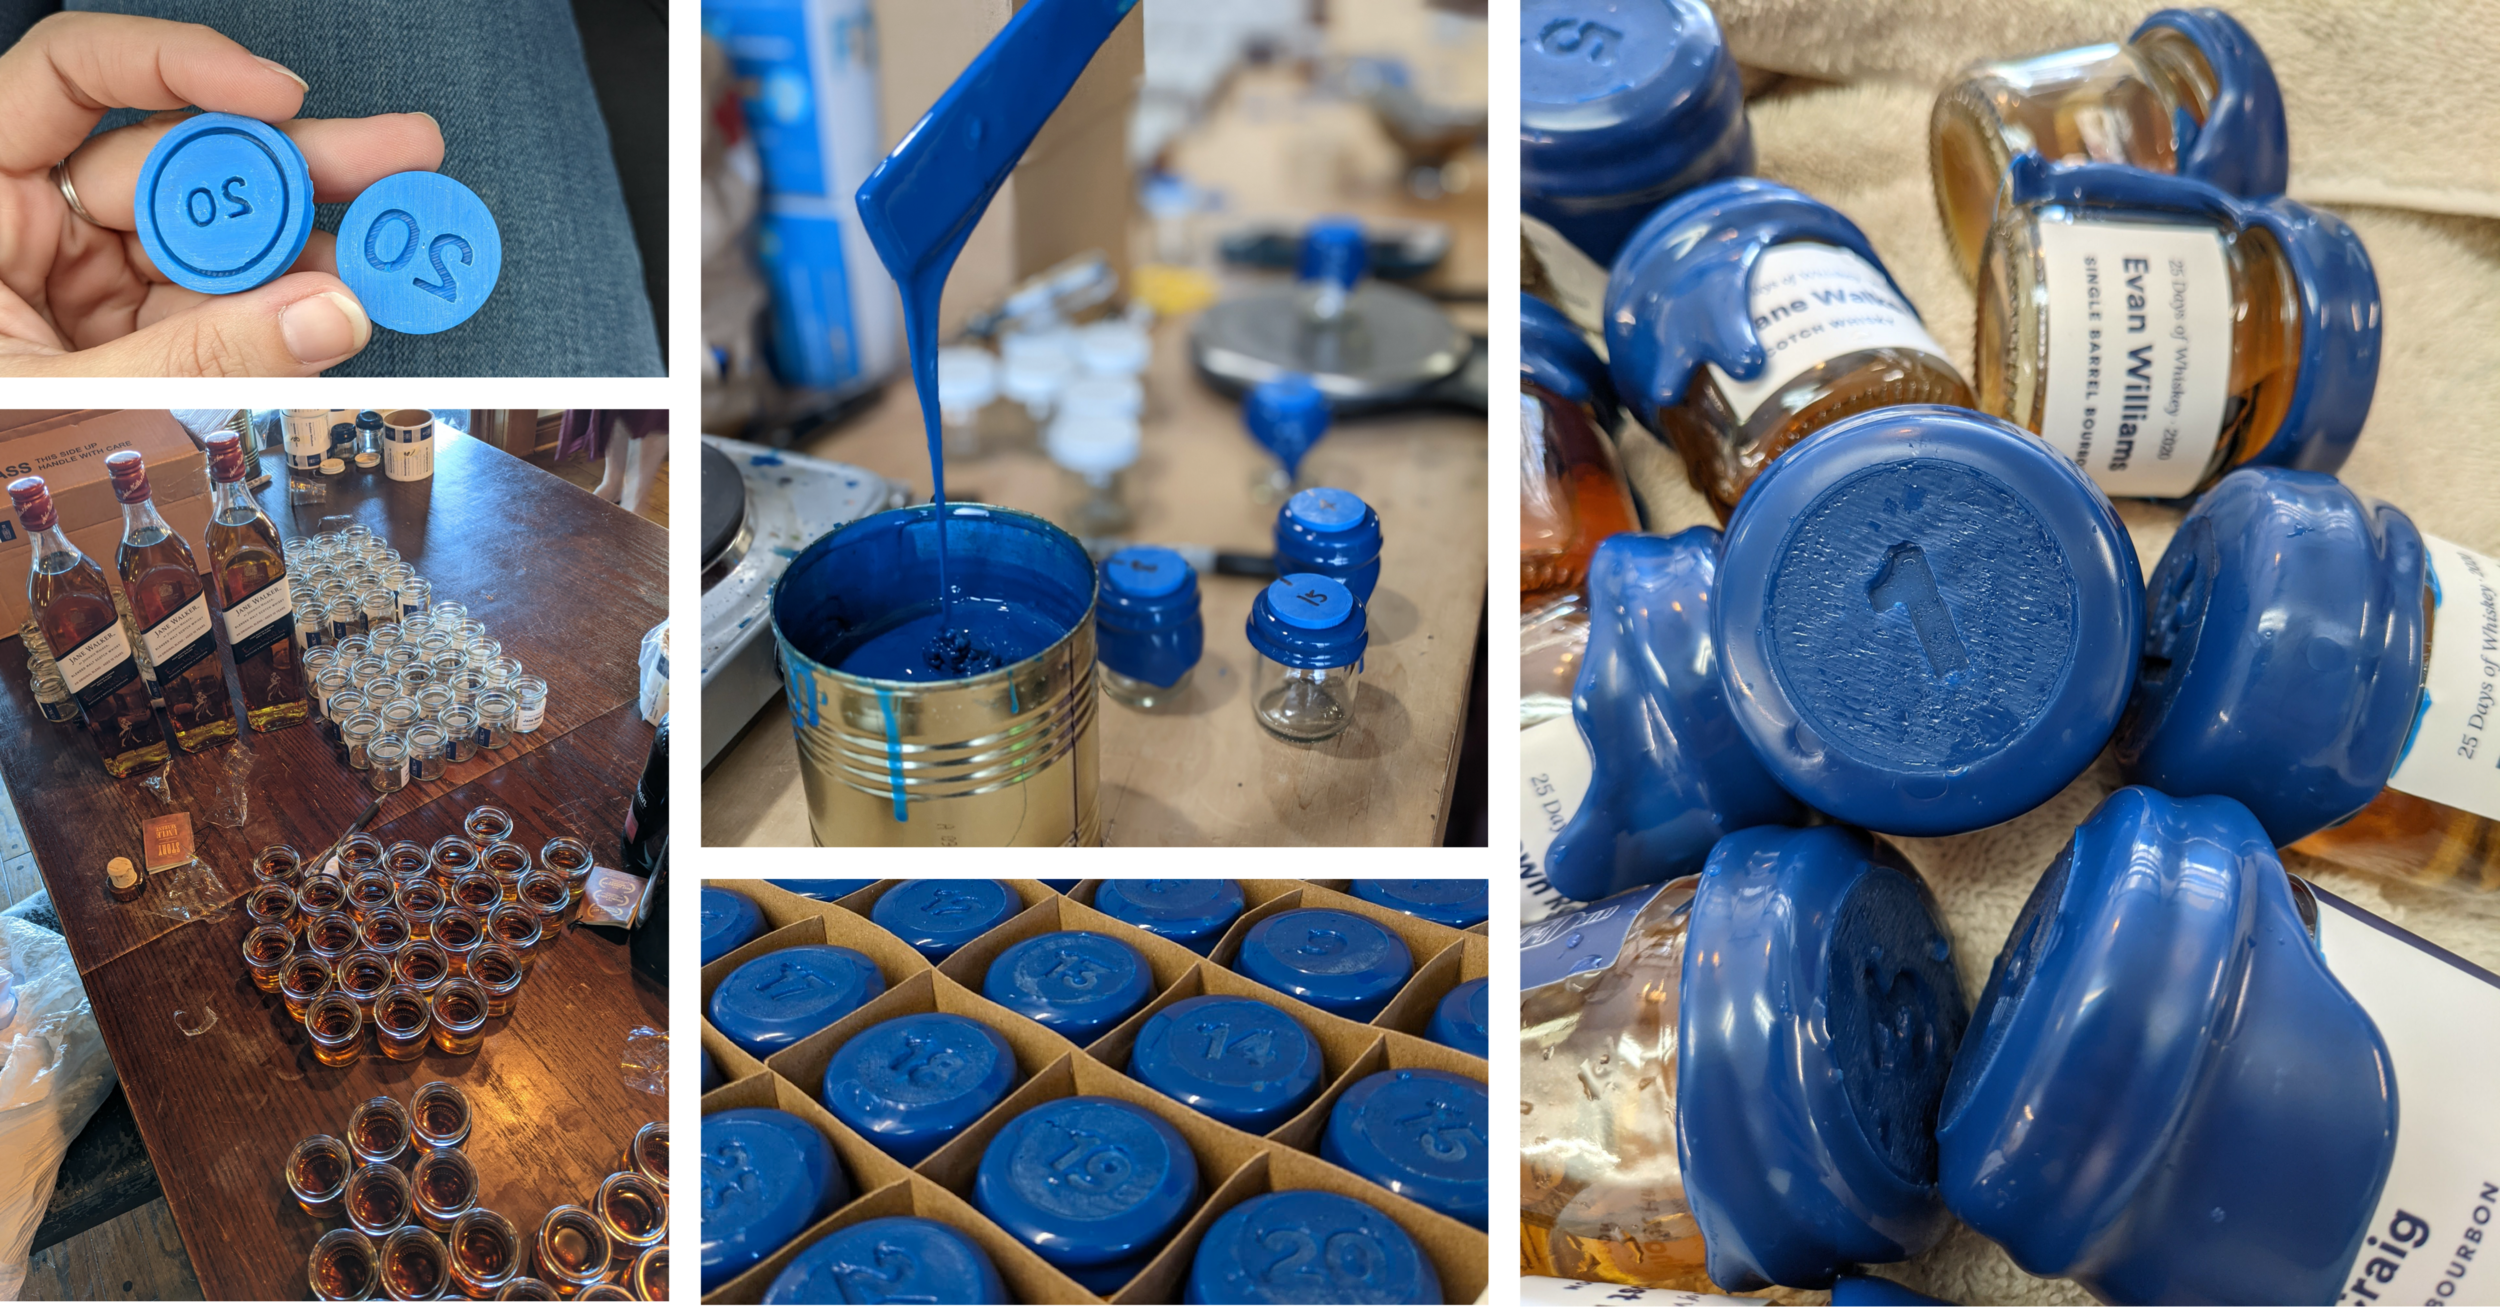  We created 3D printed chips for embossing the day number on each jar after it had been dipped in hot wax. Filling, labeling, hand-dipping, numbering, and packaging these 75 sets was a labor of love. 